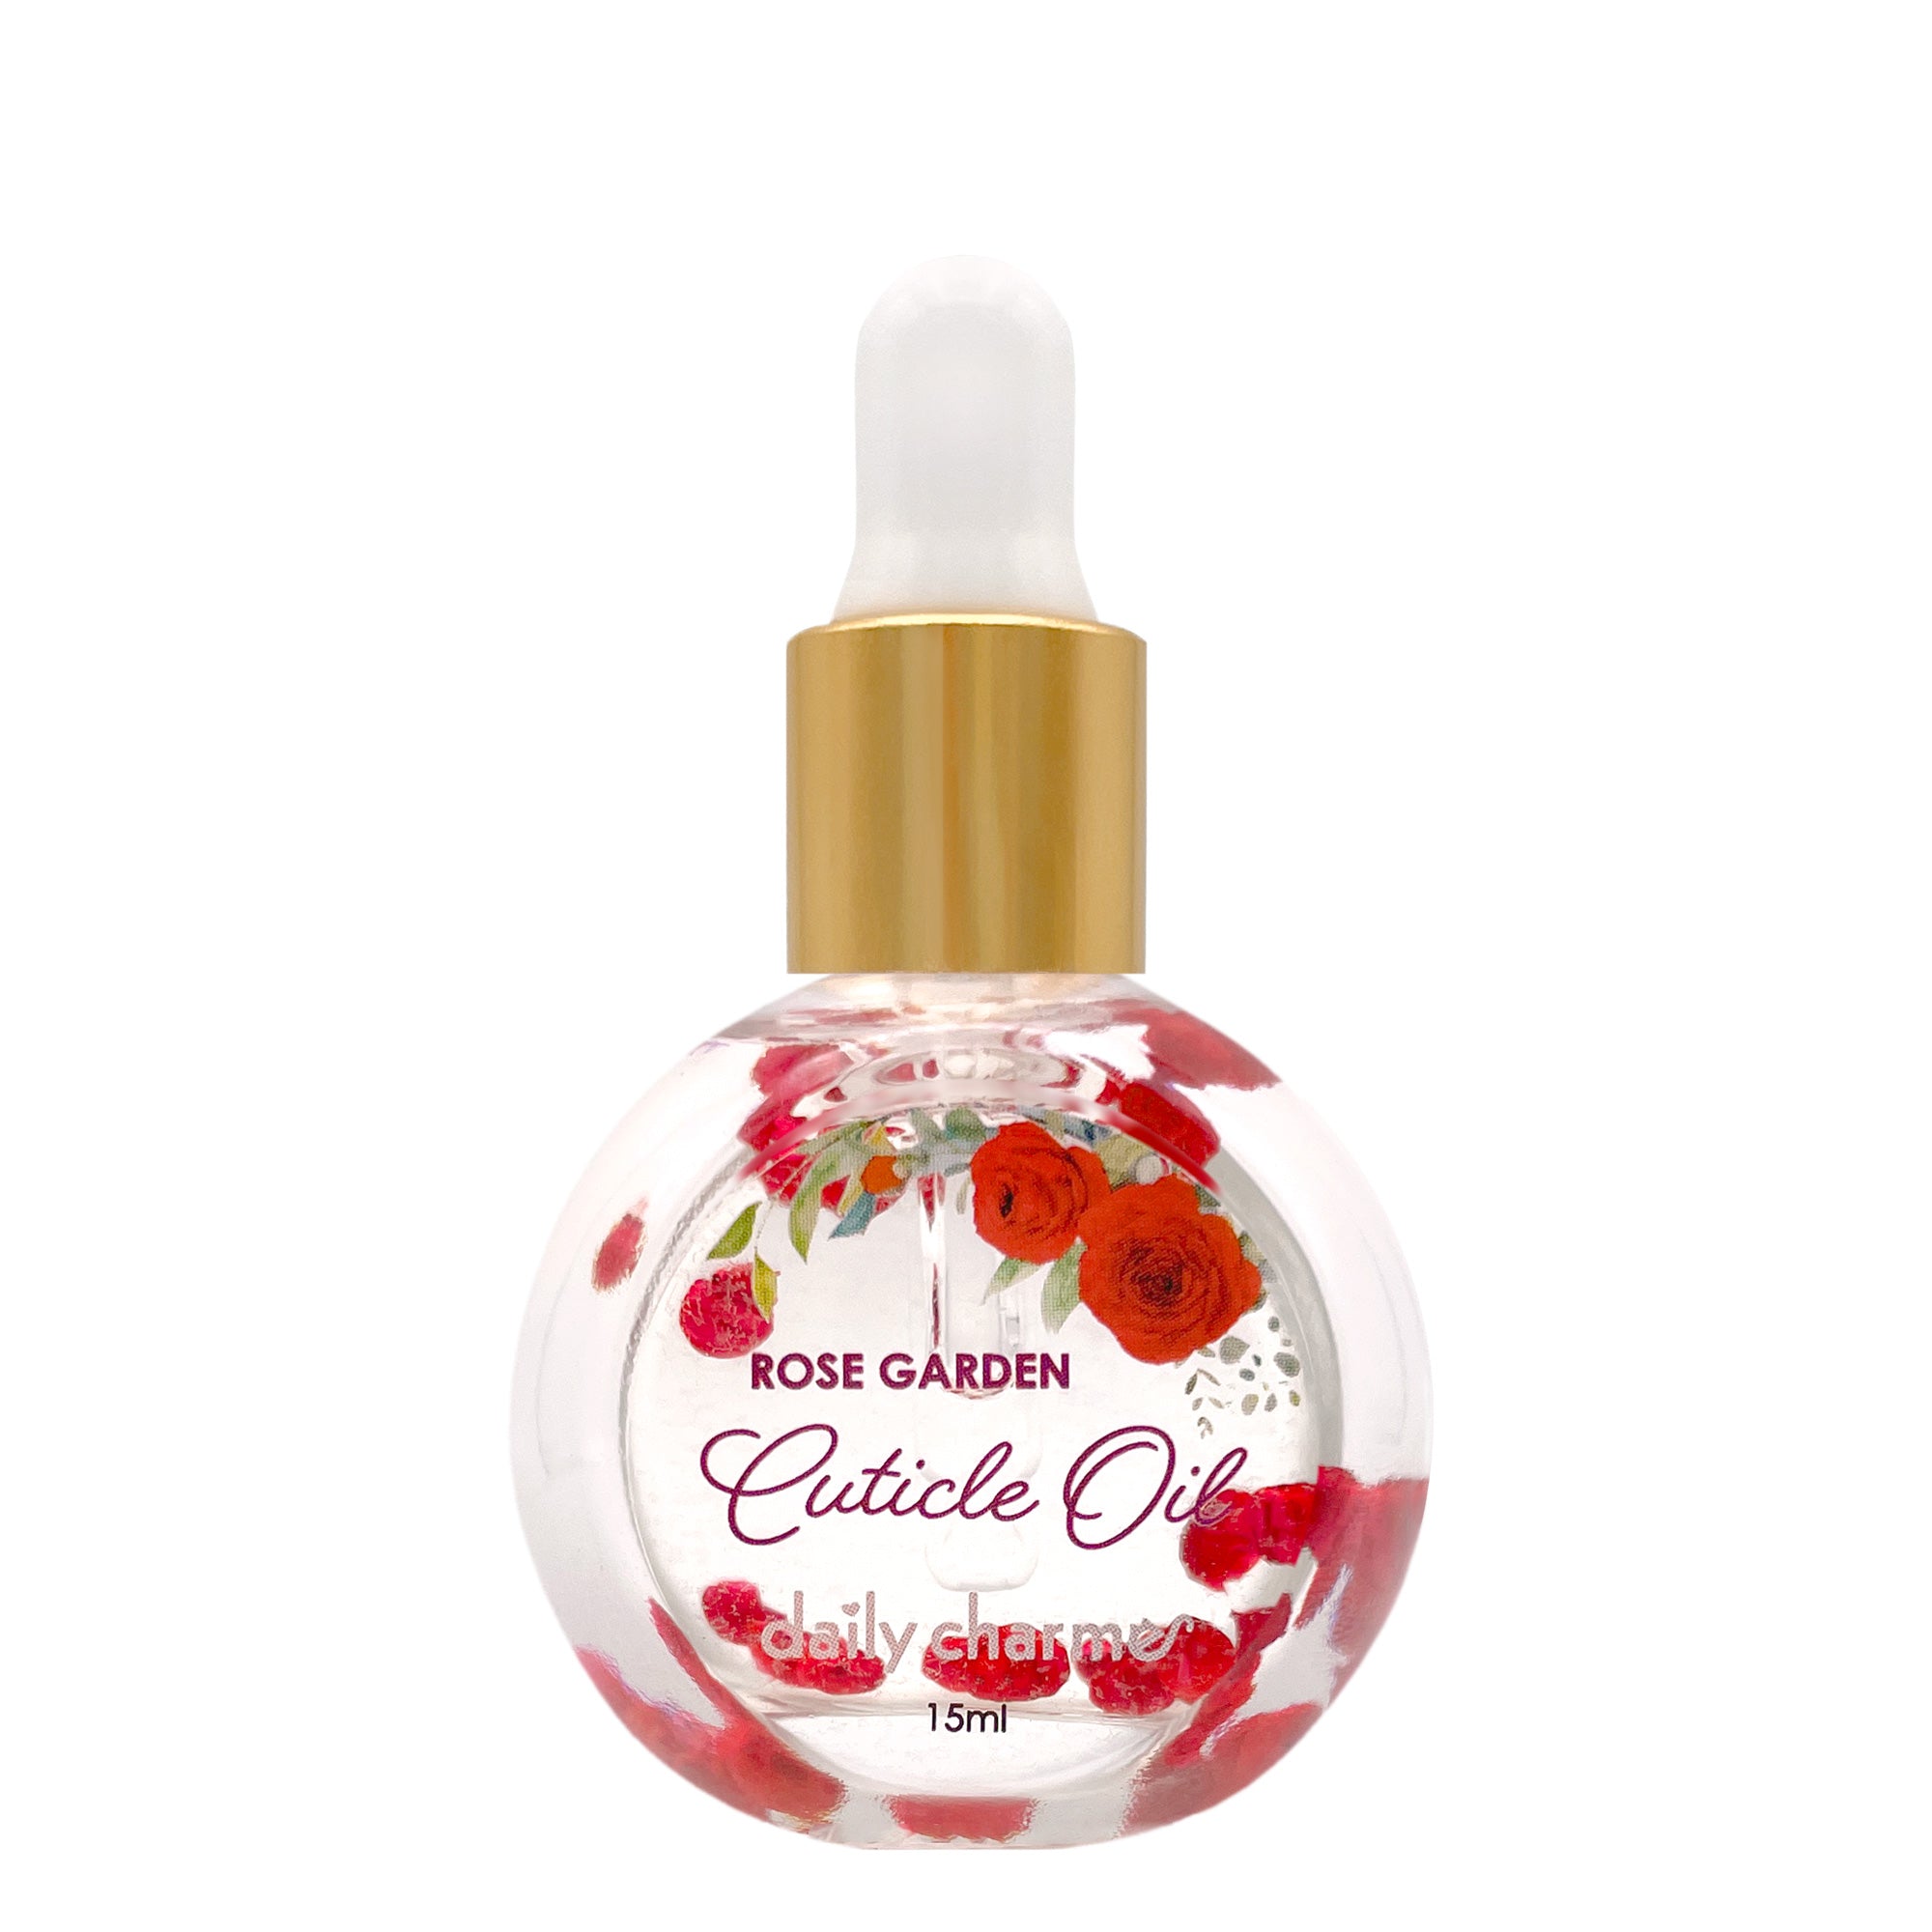 Daily Charme Cuticle Oil / Rose Garden Scented Woody Natural Vitamin E Nourishing